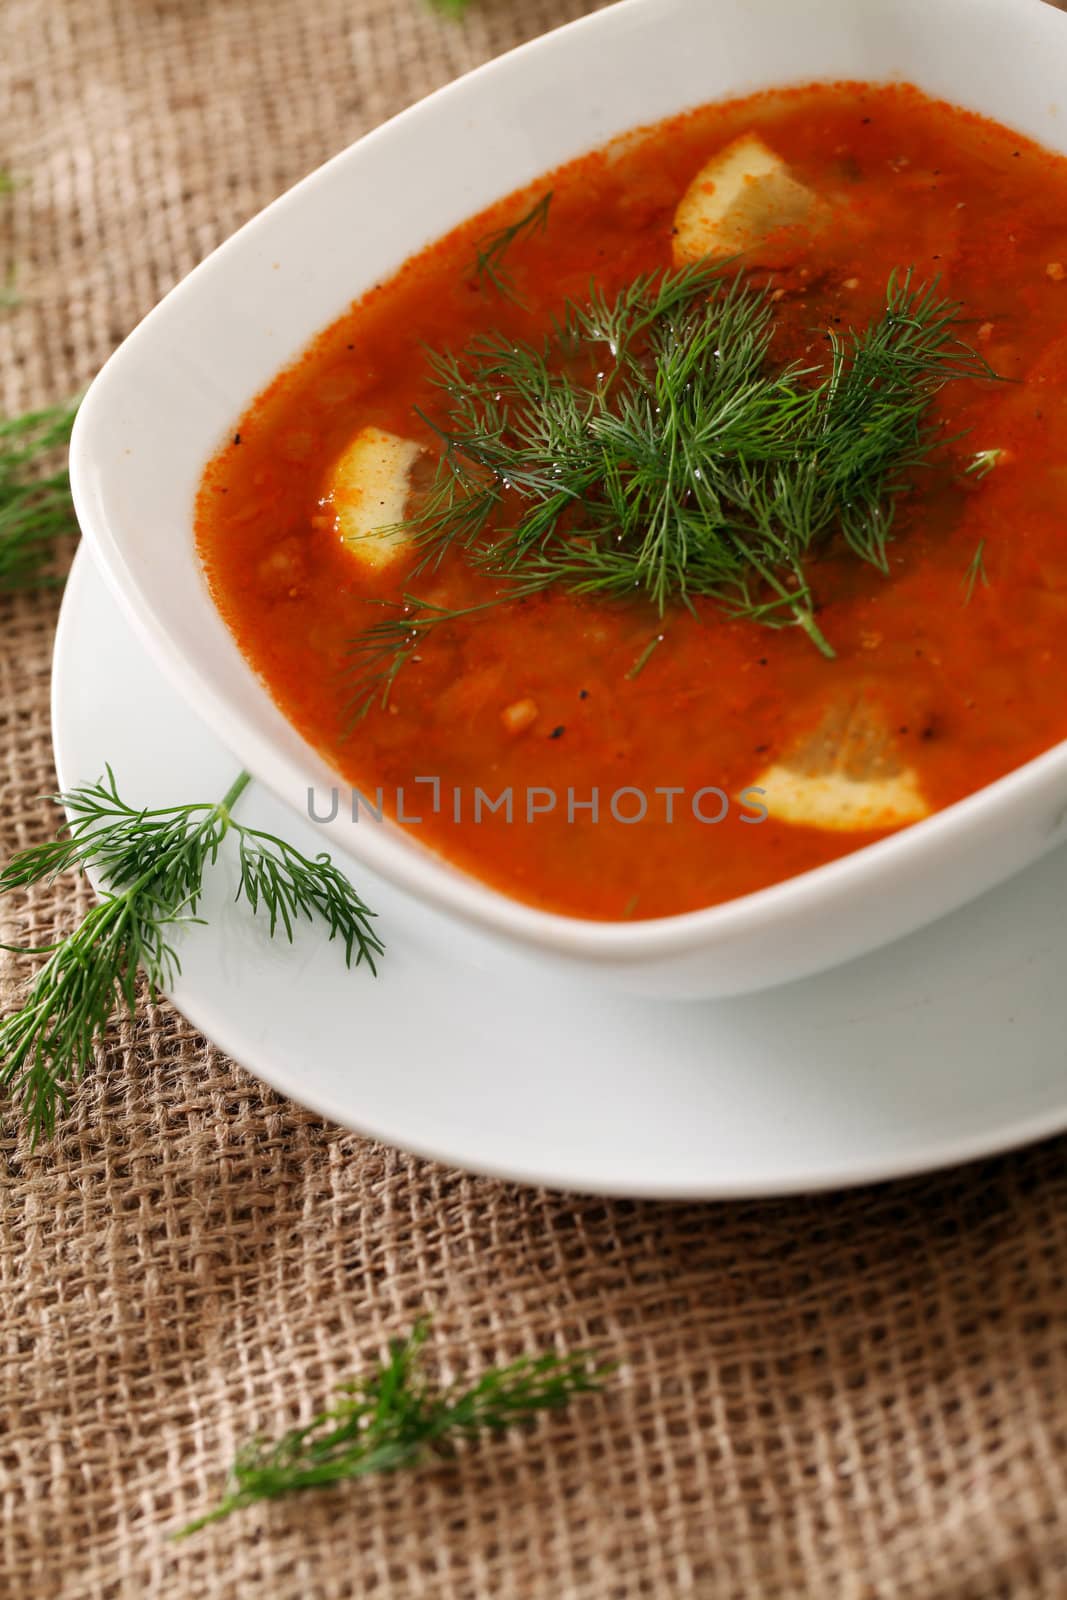 Image of bowl of hot red soup served with parsley on a beige tablecloth